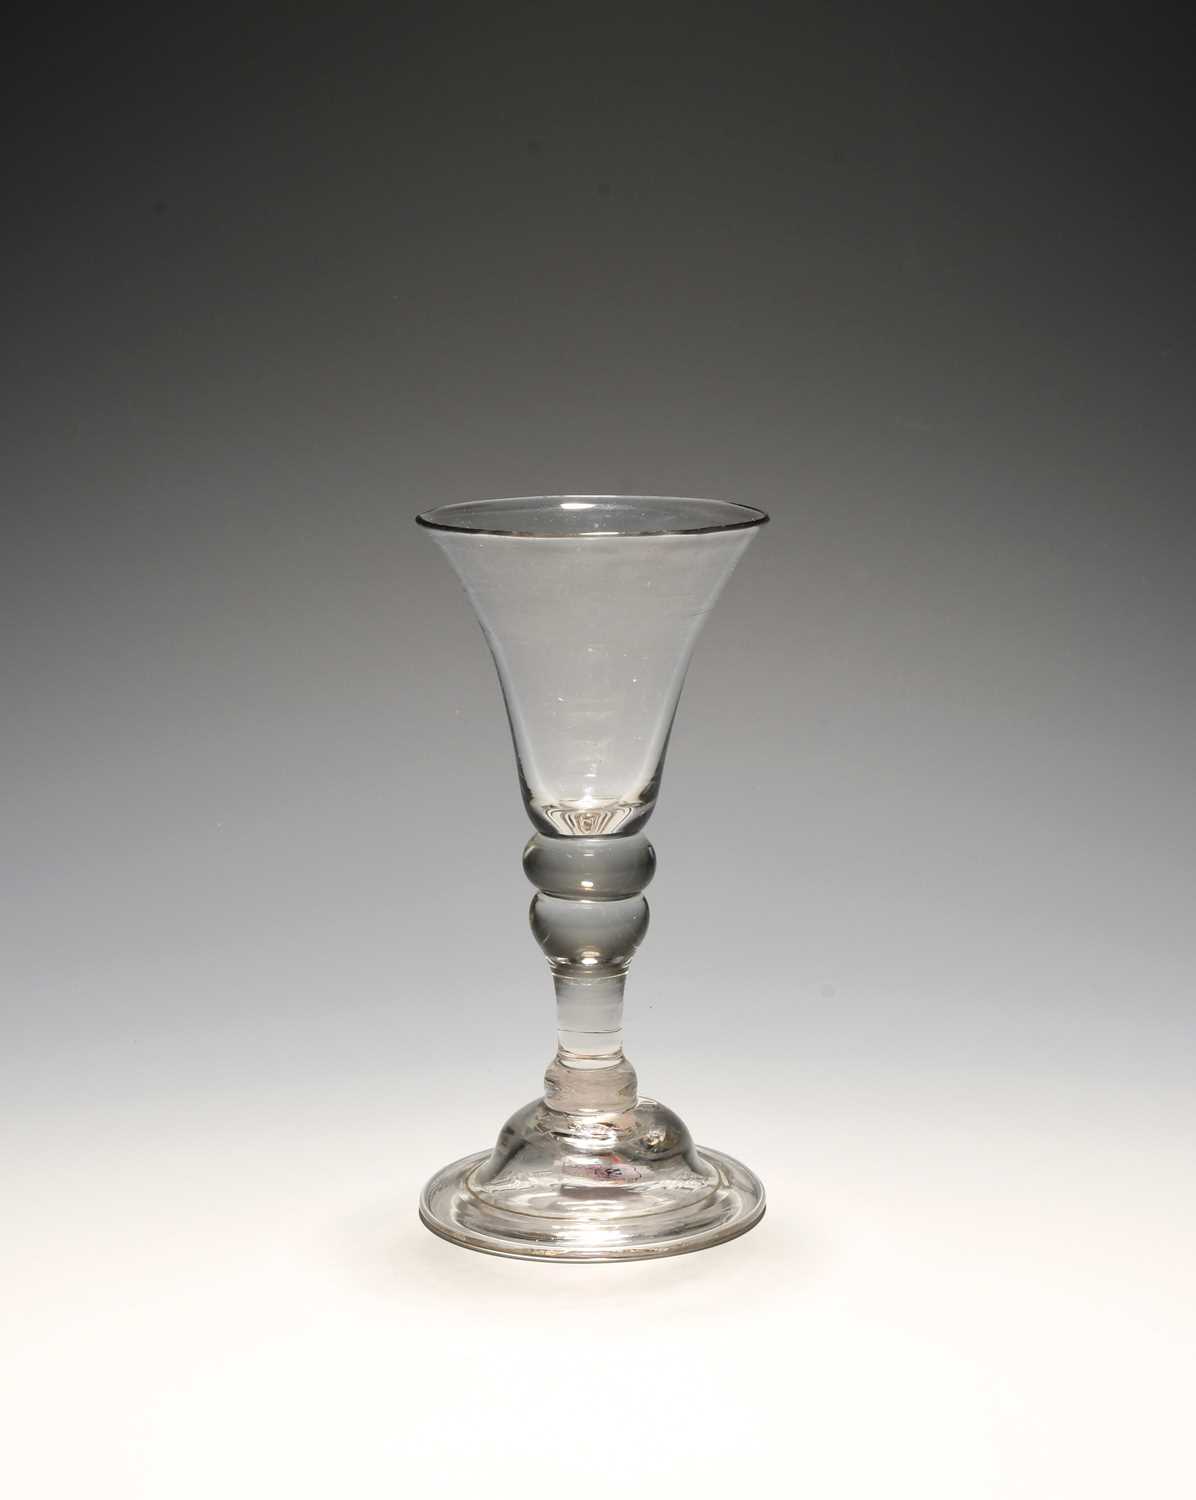 A small baluster wine glass, c.1730, with a bell bowl over a cushion knop and inverted baluster